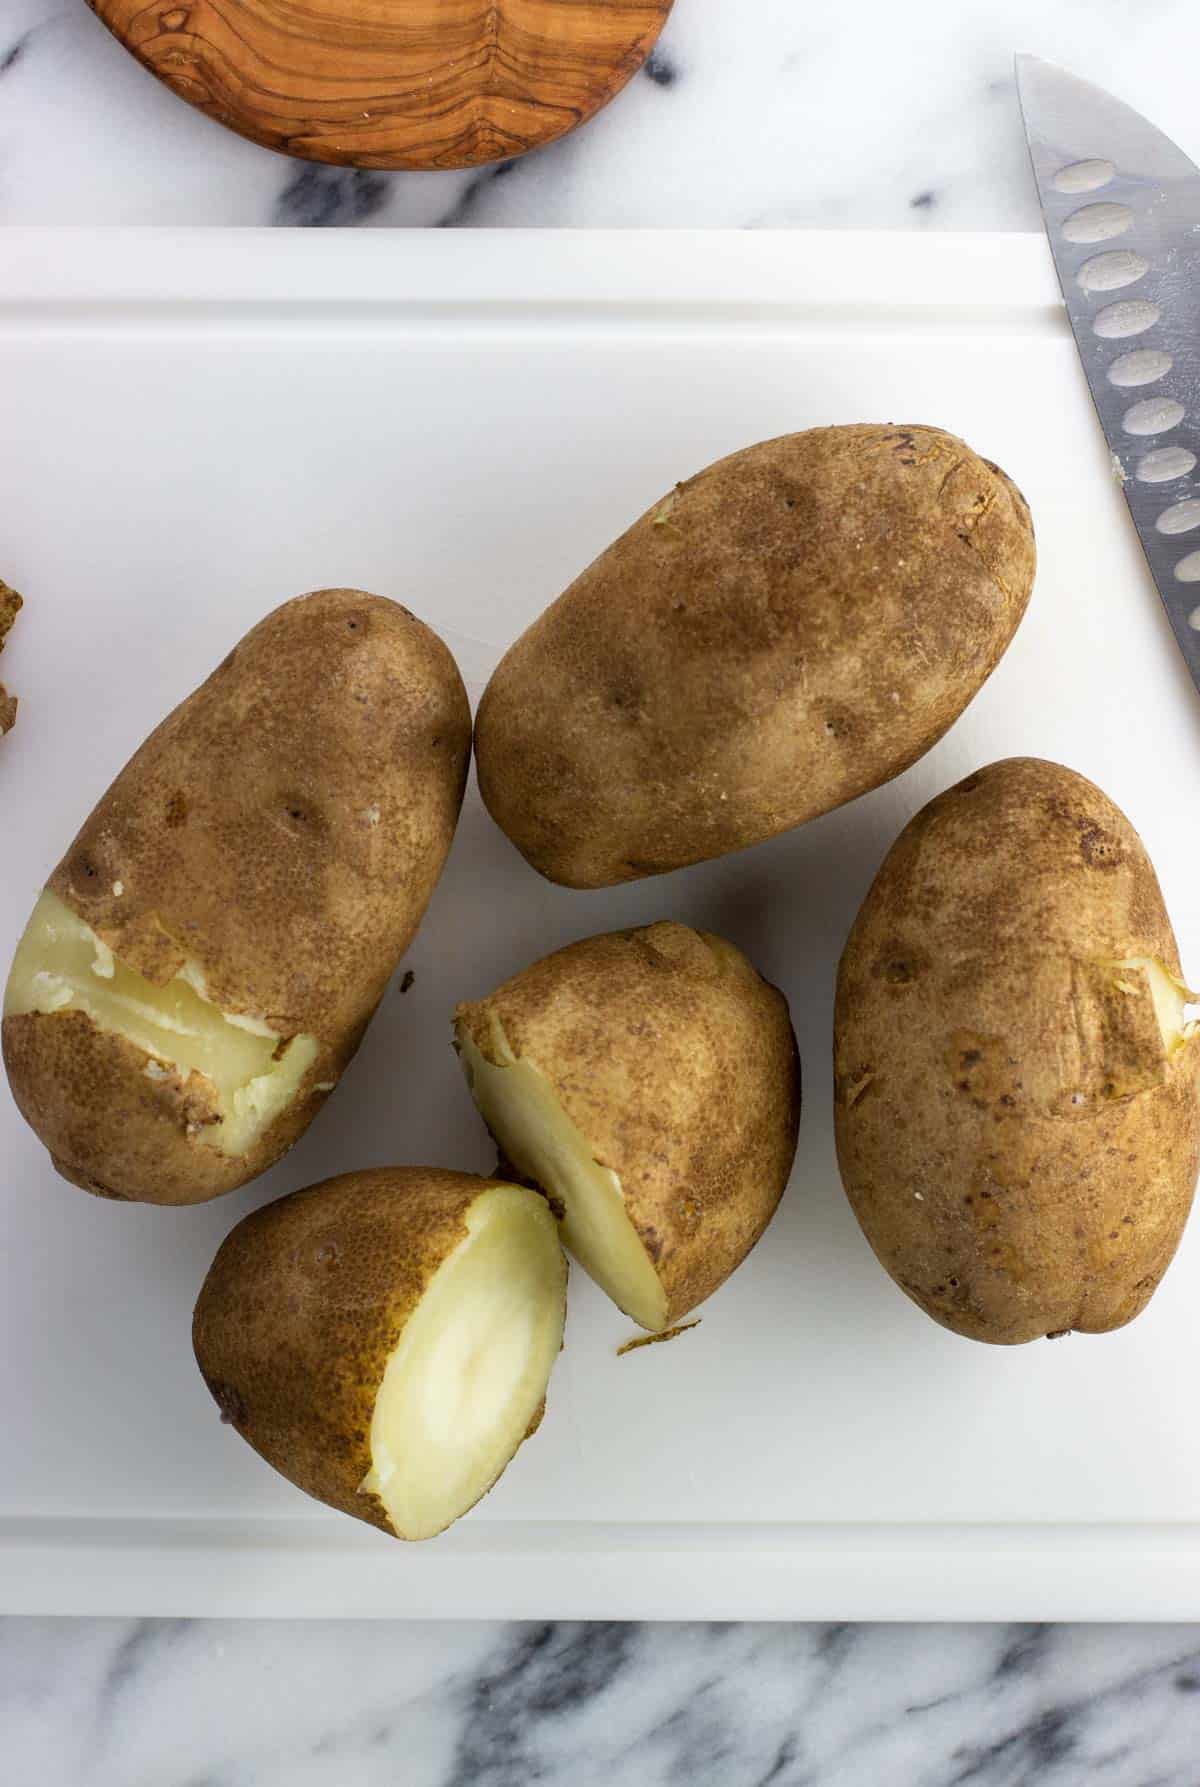 Four parboiled potatoes on a cutting board, with one sliced in half.